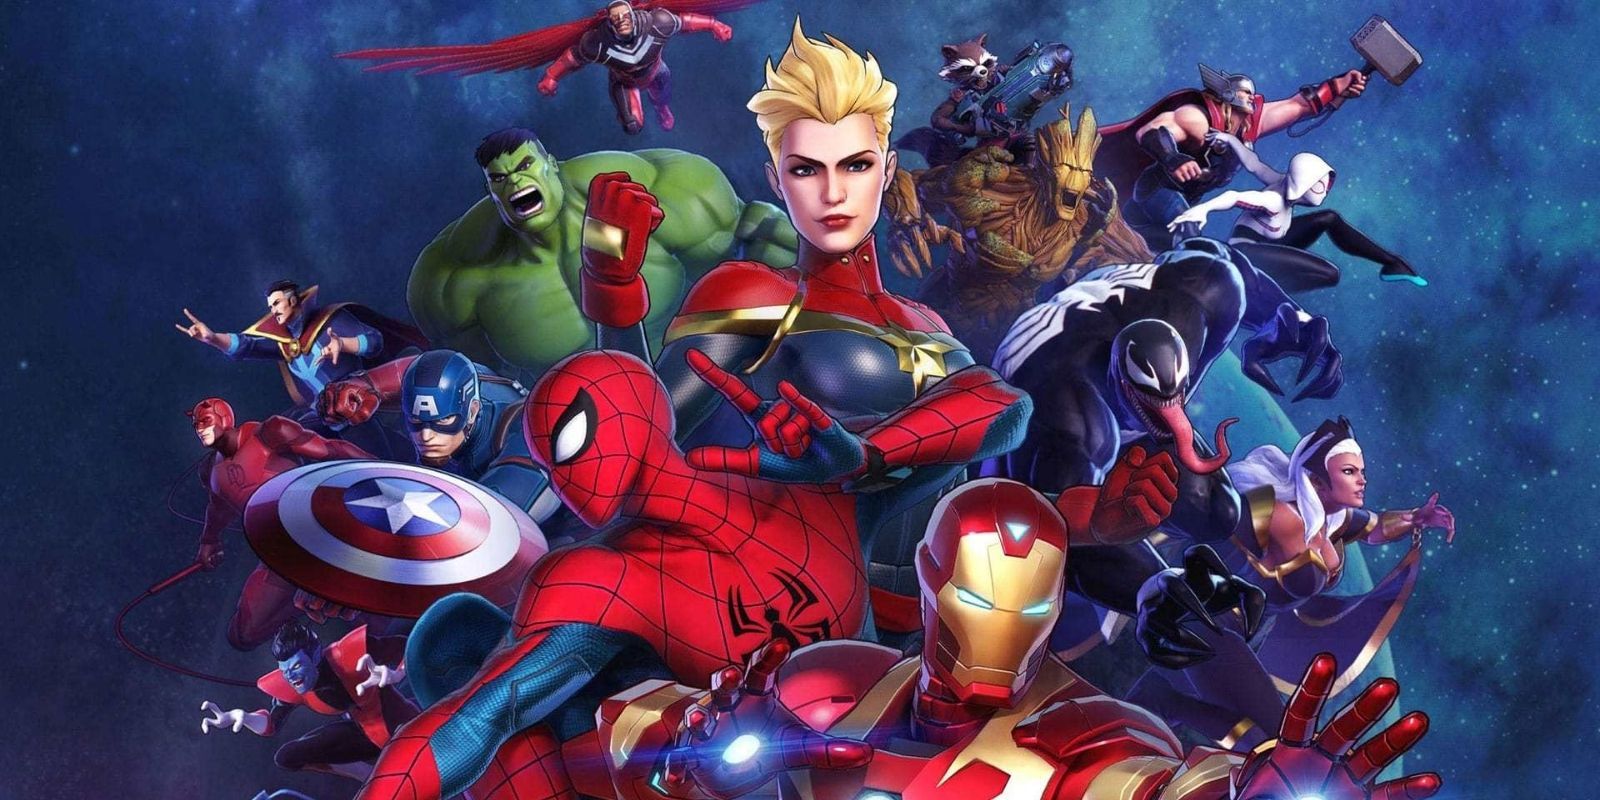 The cast of Marvel Ultimate Alliance 3, including Iron Man, Spider-Man, Captain Marvel and more